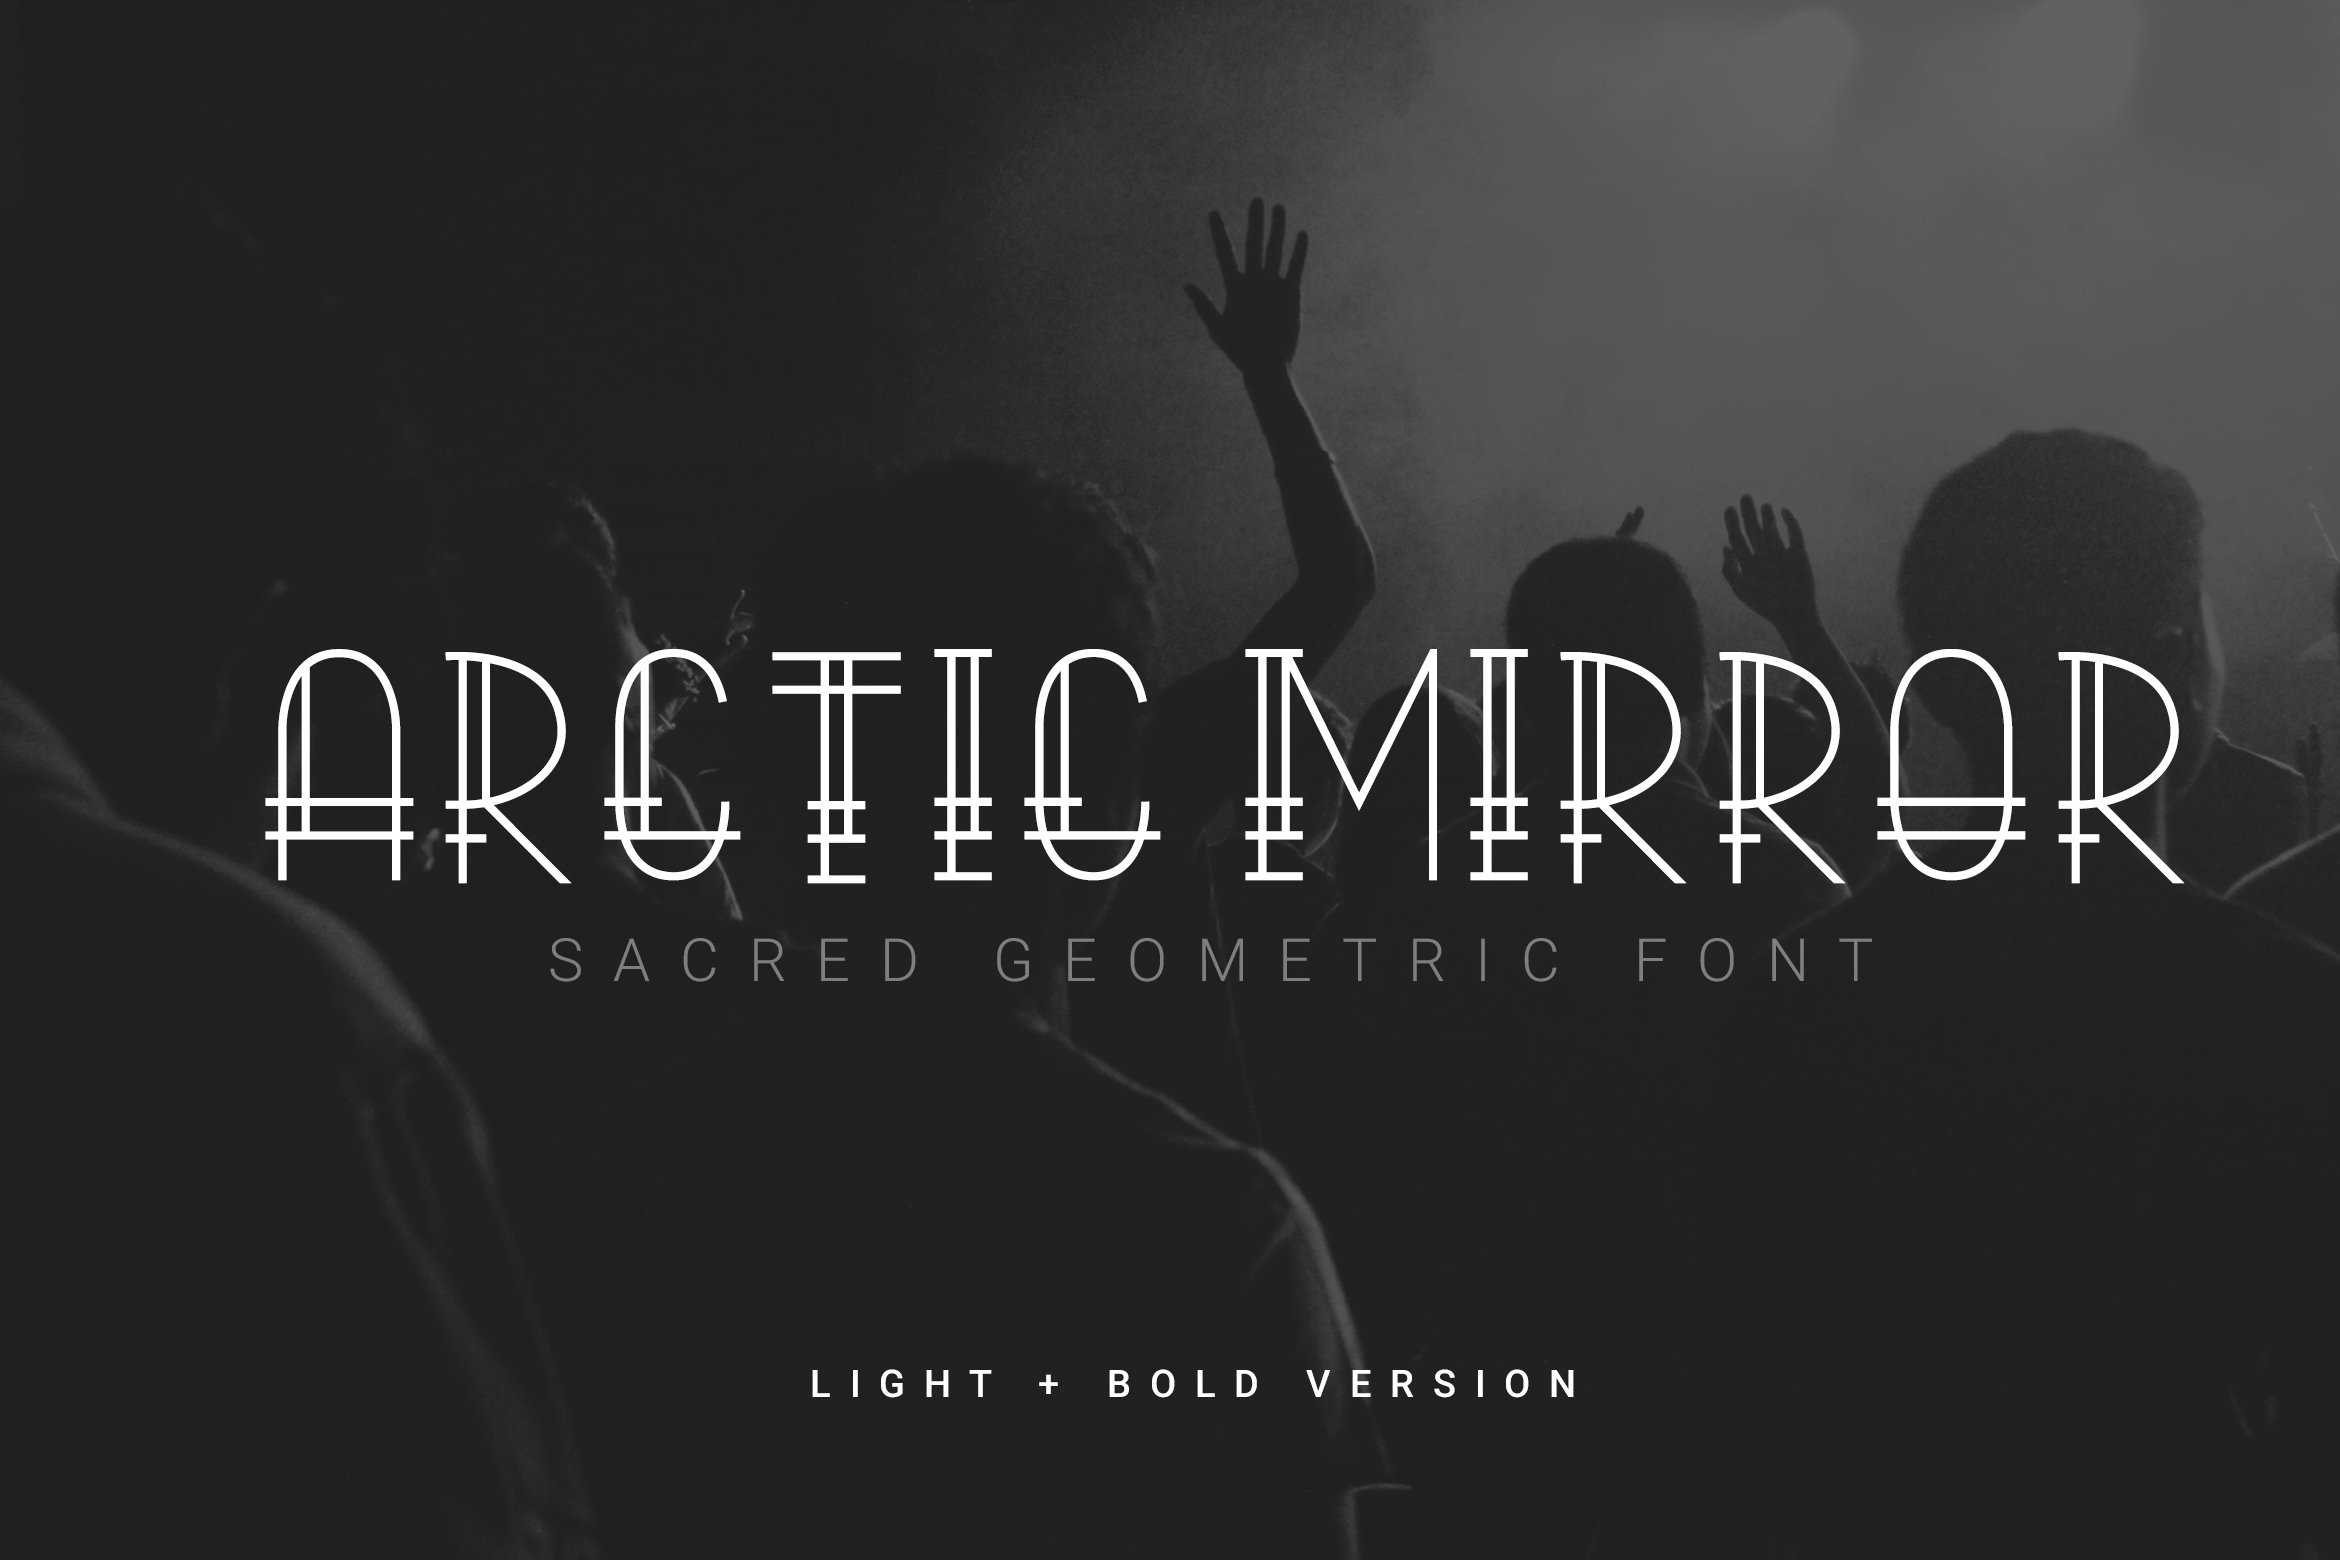 Arctic Mirror - Sacred Font cover image.